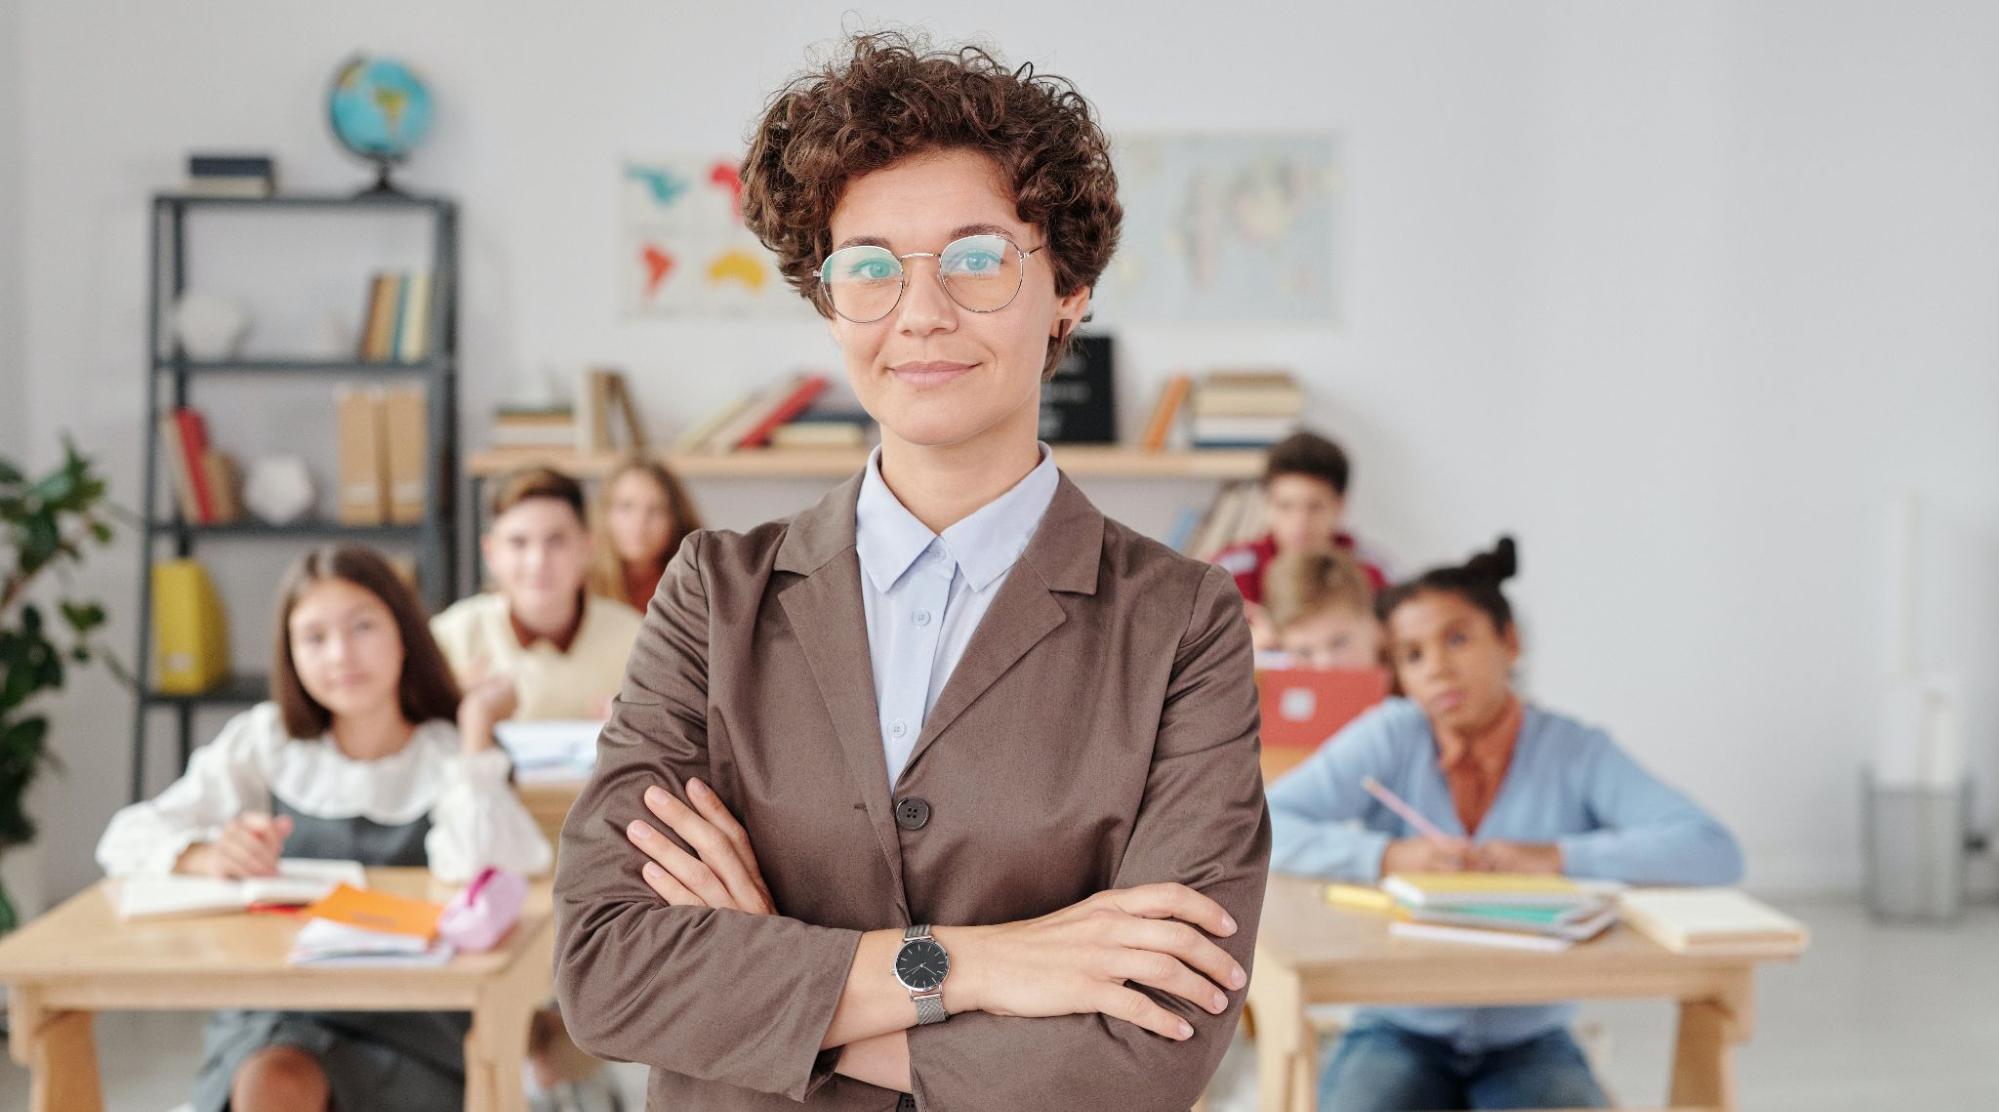 Teacher standing with arms crossed in front of class